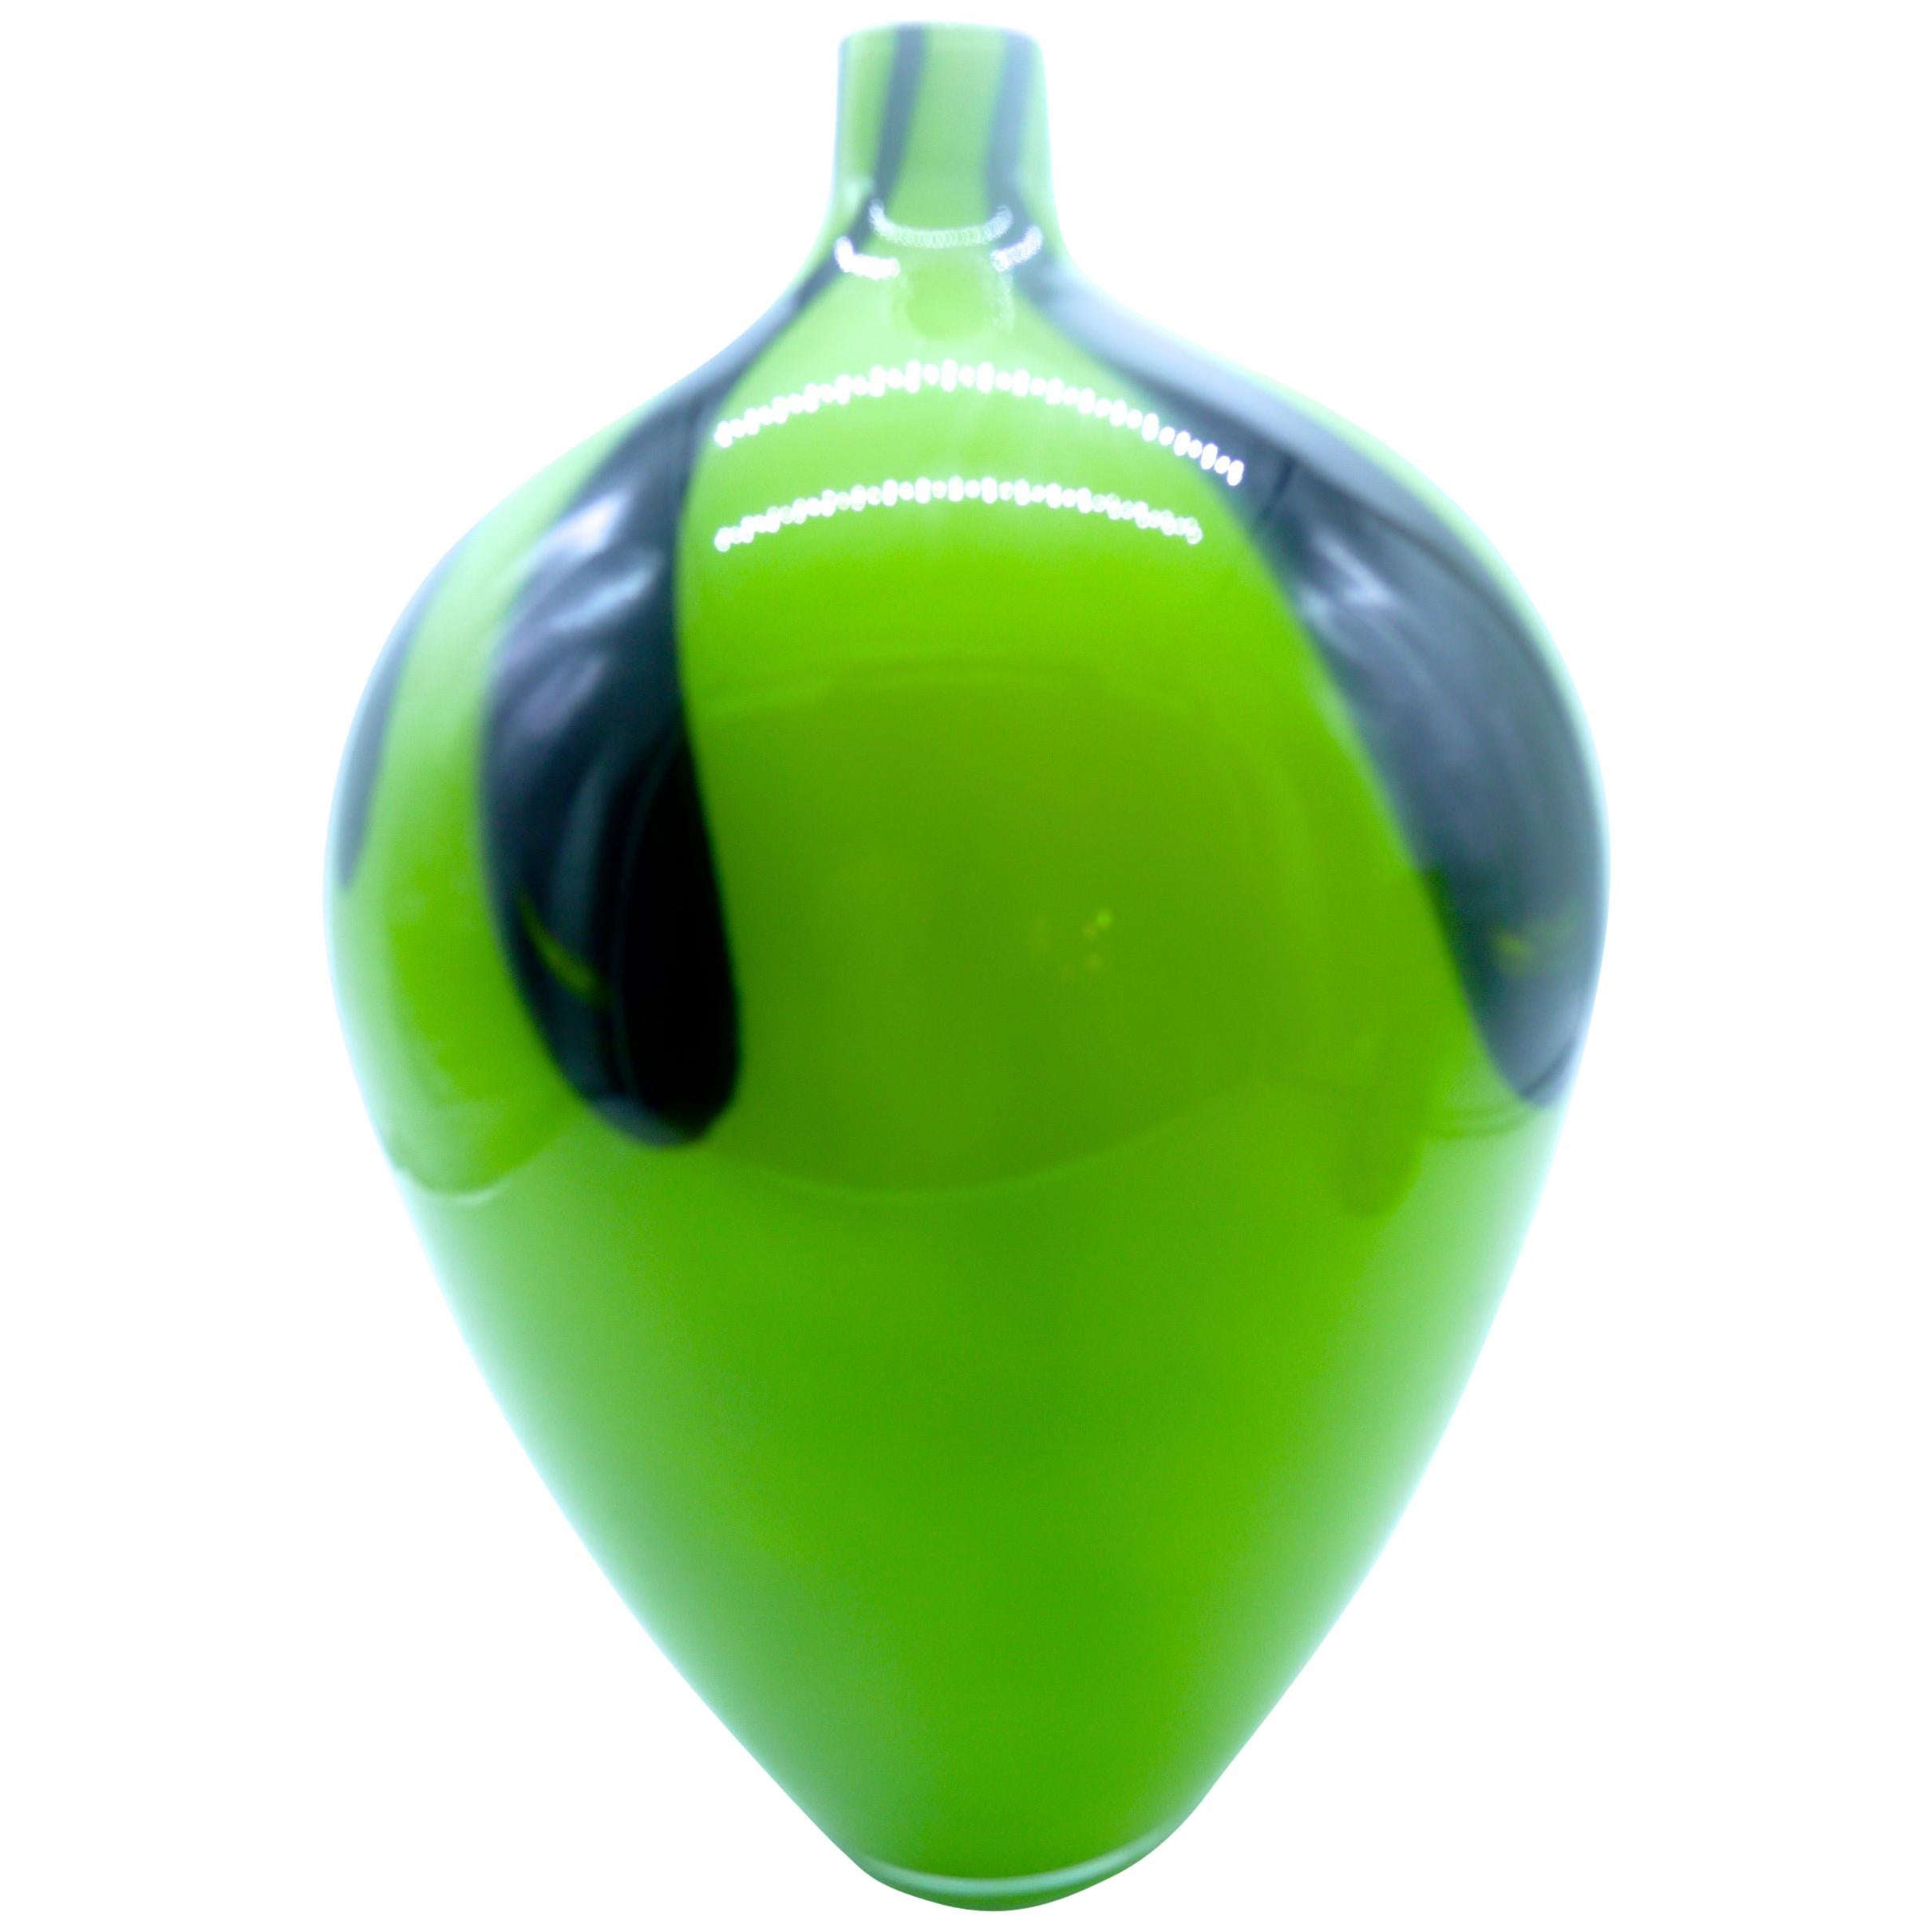 Murano Floor Vase Lime Green with Deep Brown Motif, Mid-Early 1980s For Sale